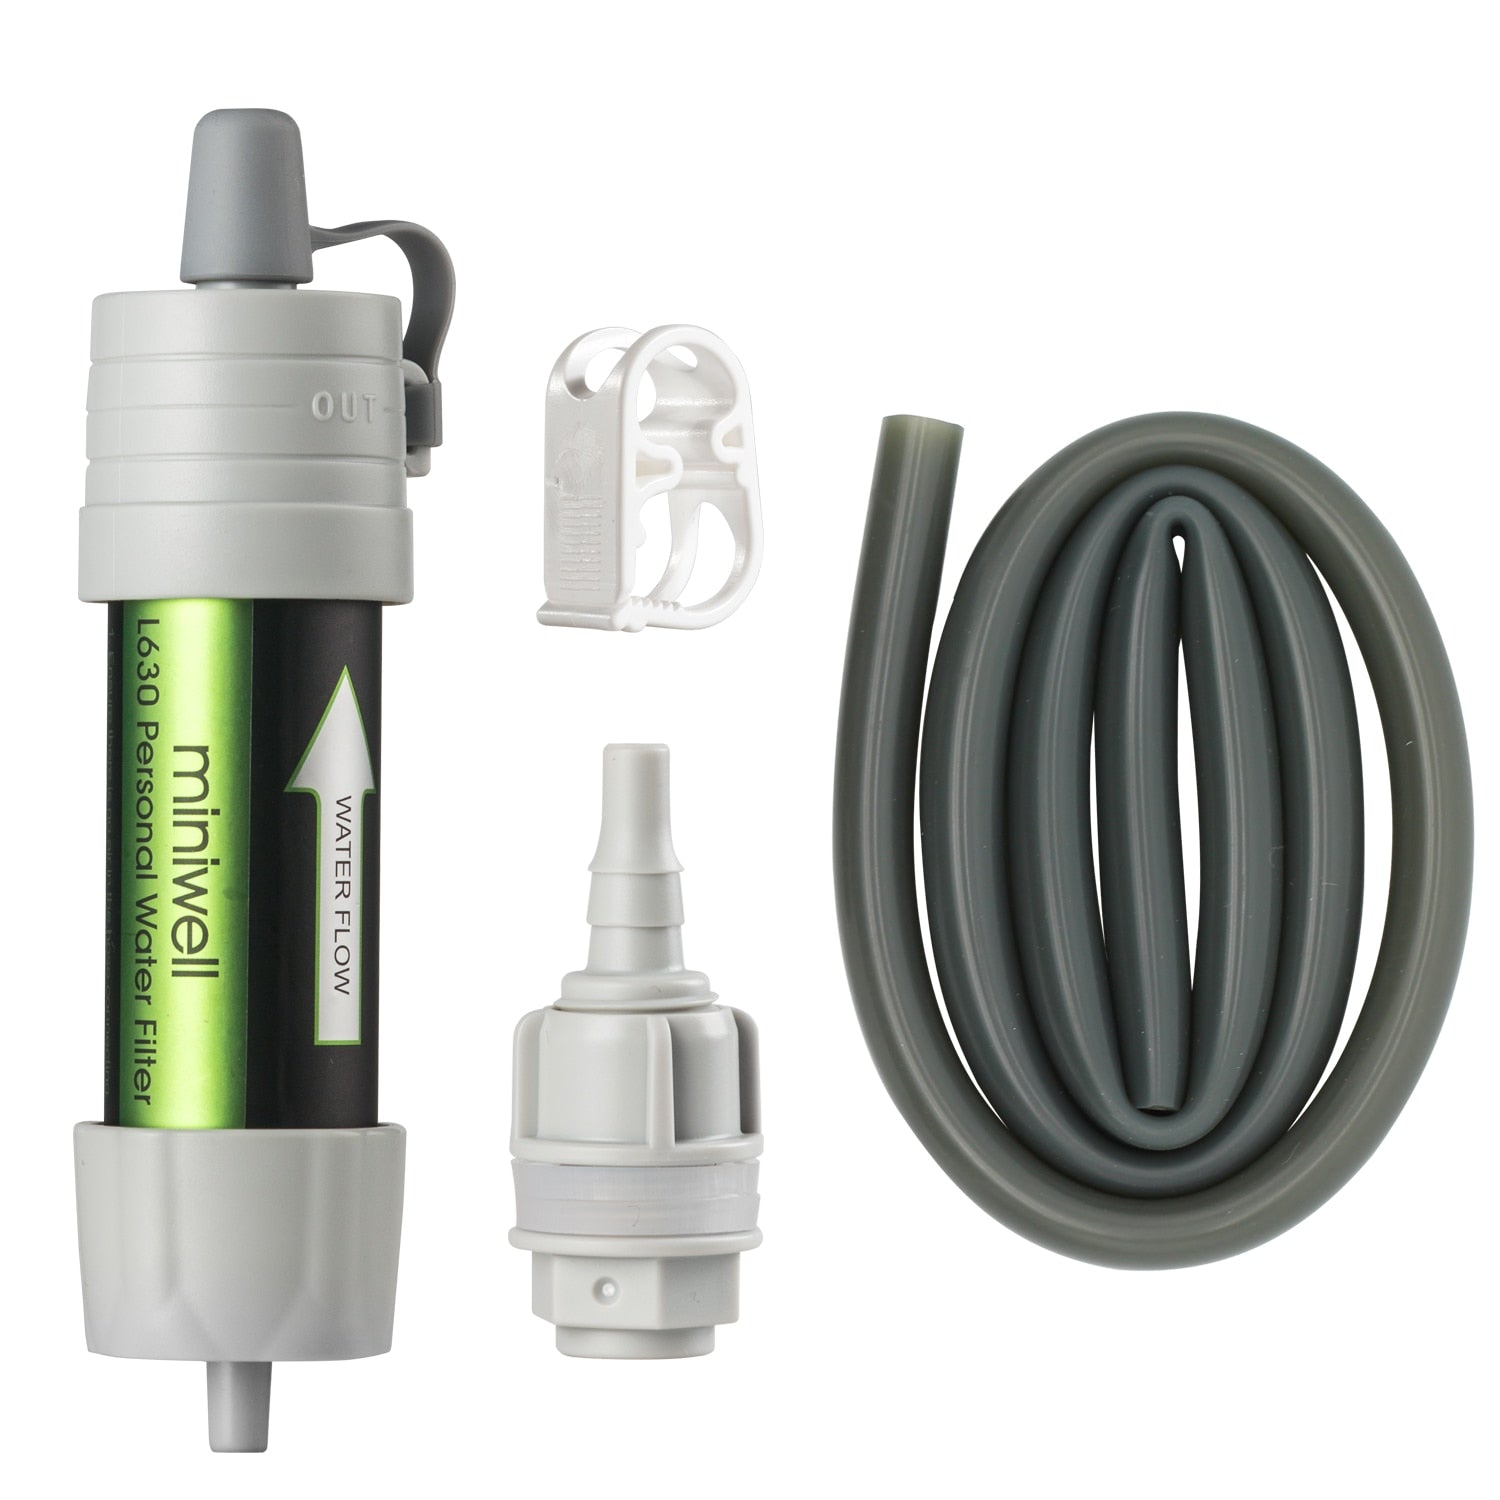 miniwell L630 portable Water Filter equipment for military survival kits.